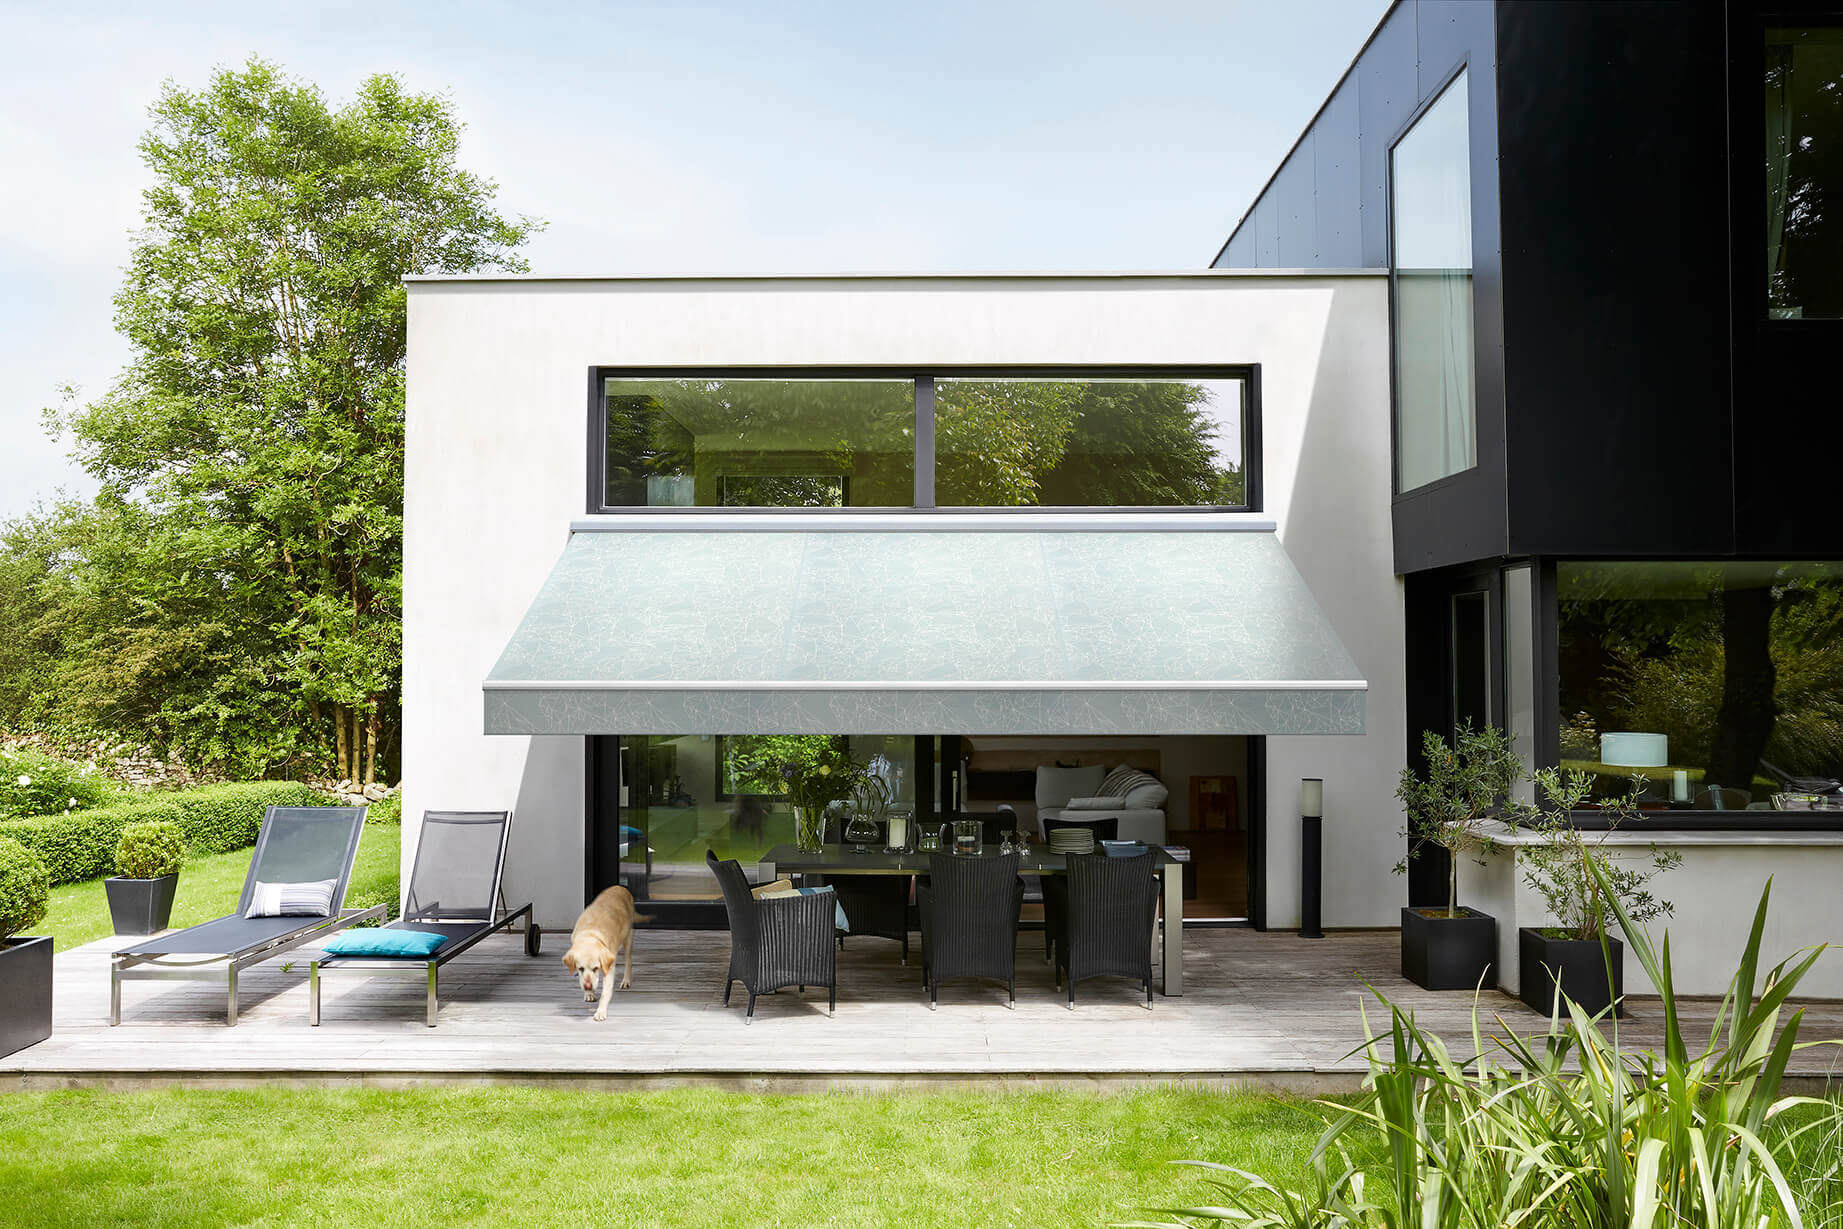 Minimalist architecture with a light grey canopy awning providing shade for people and pets